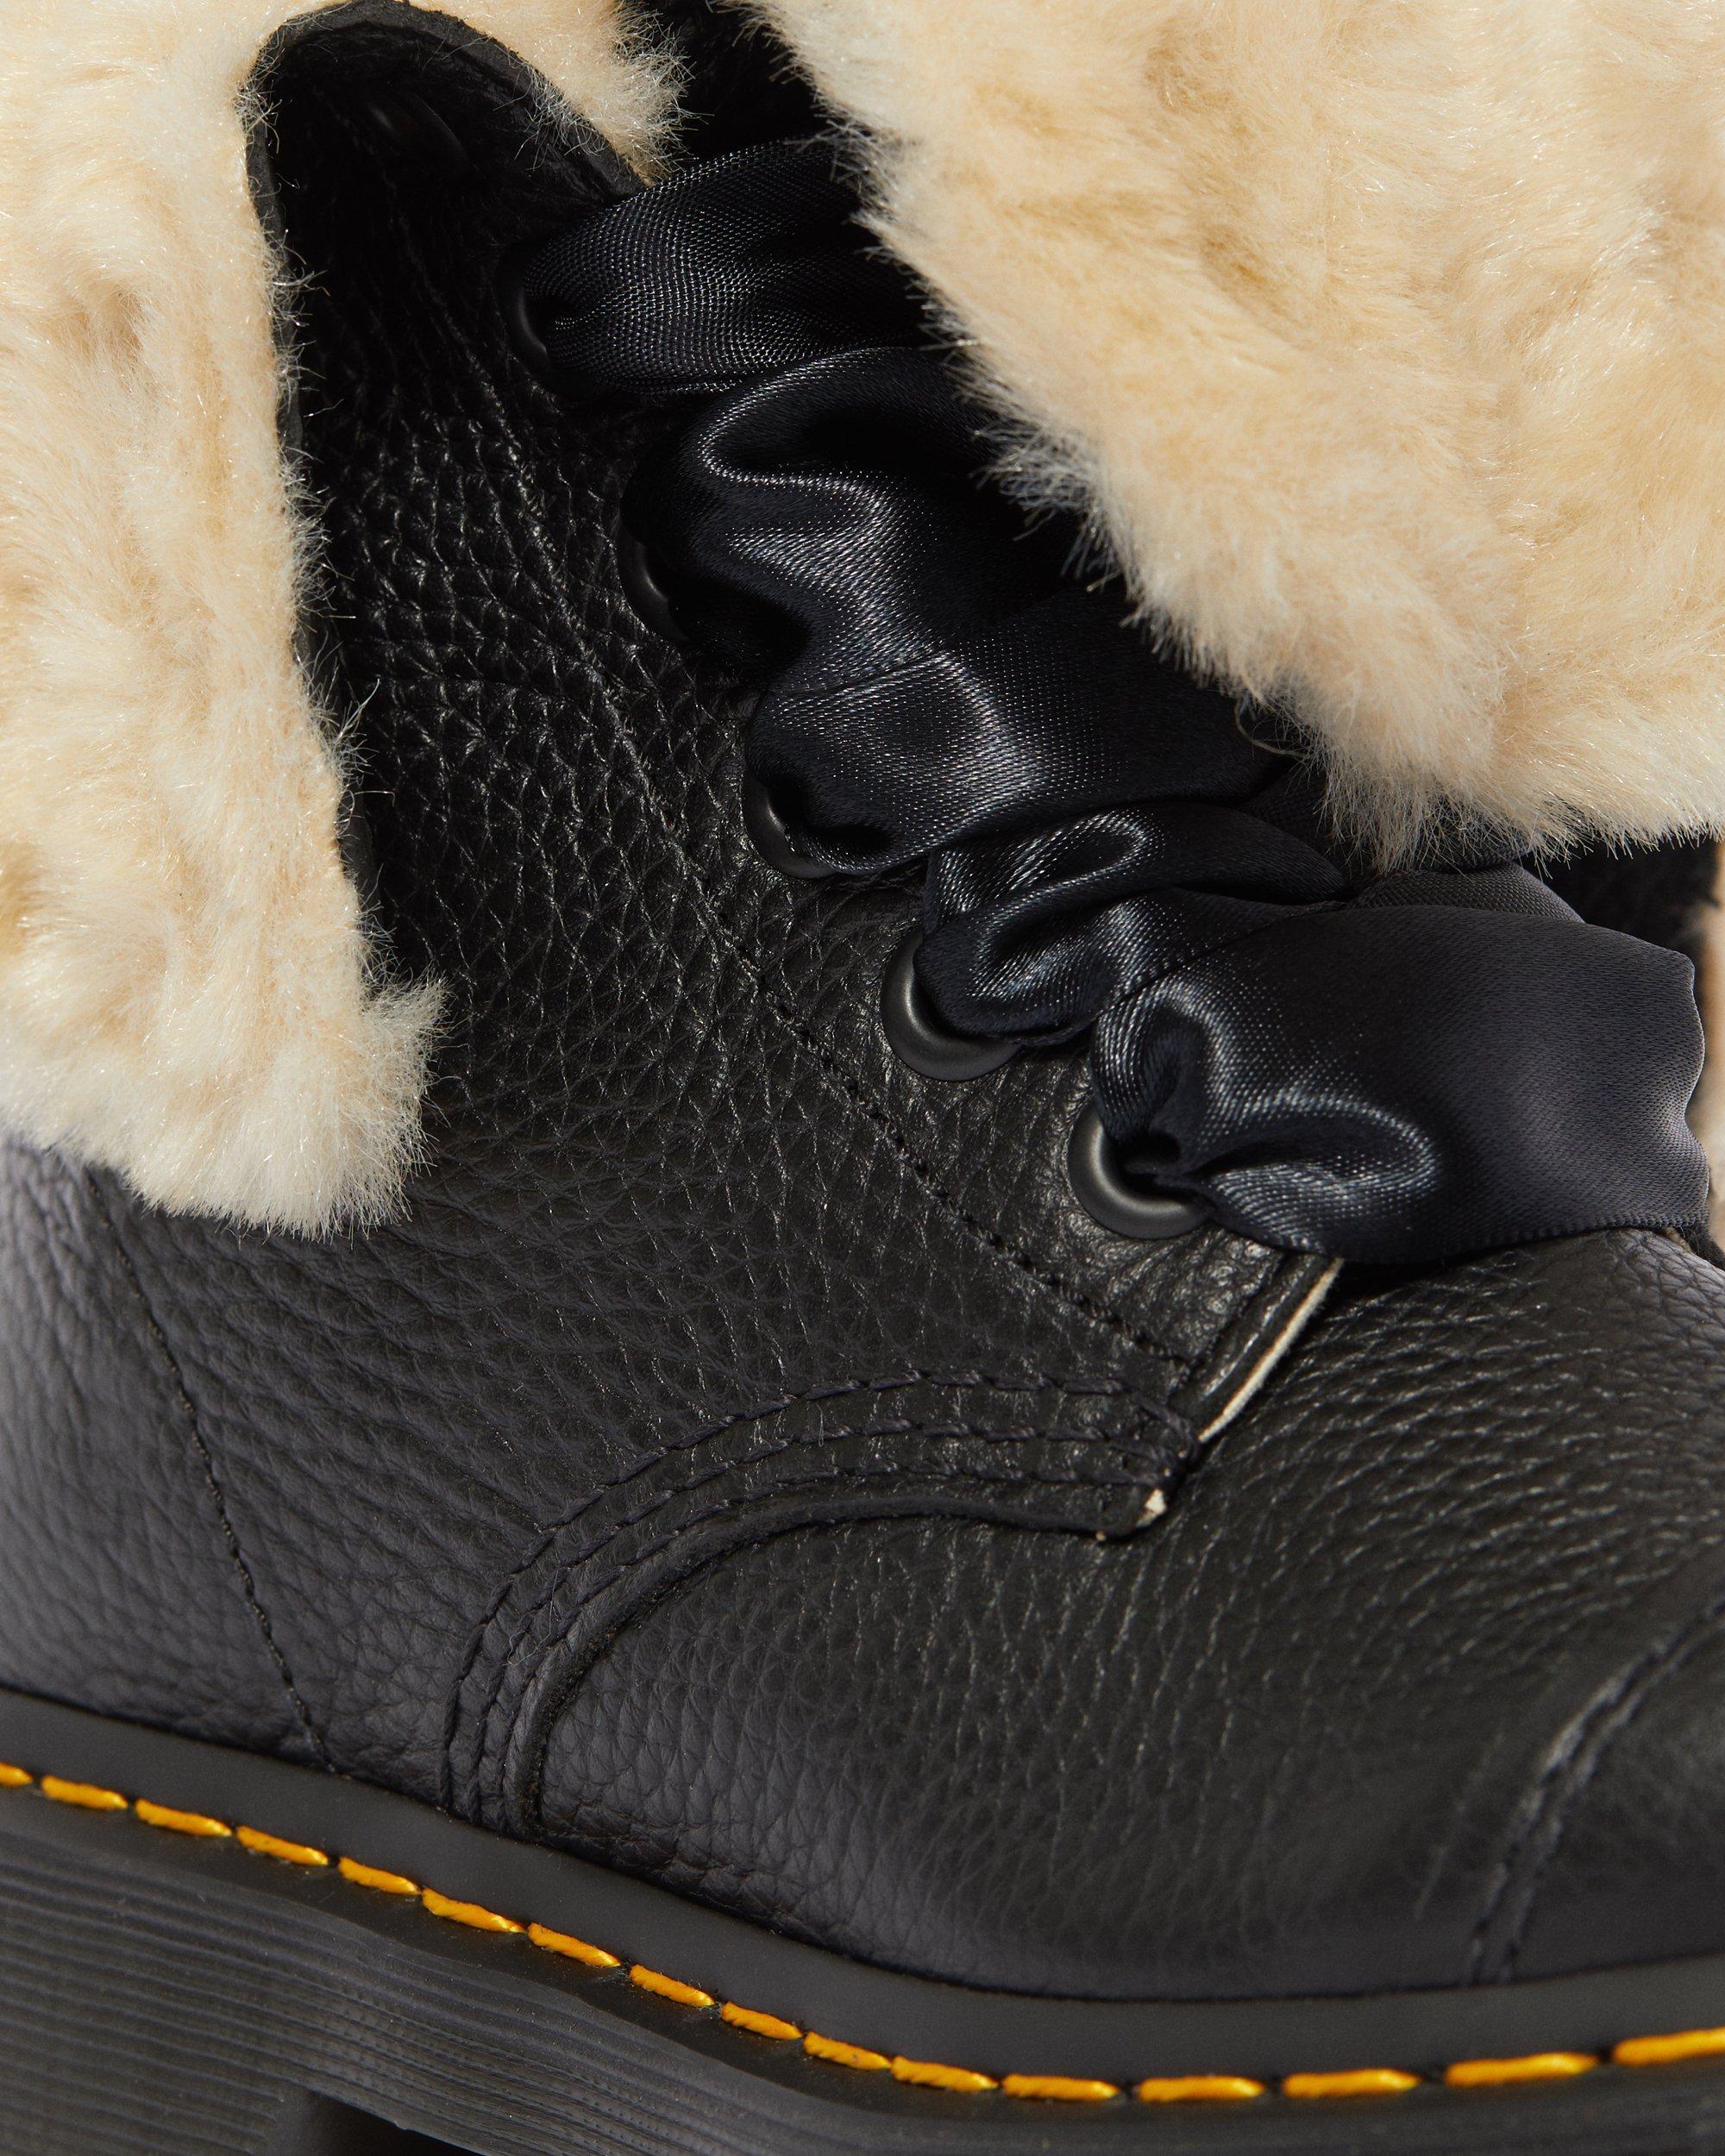 Dr. Martens Aimilita Faux Fur Lined Leather High Boots in Black - Lyst